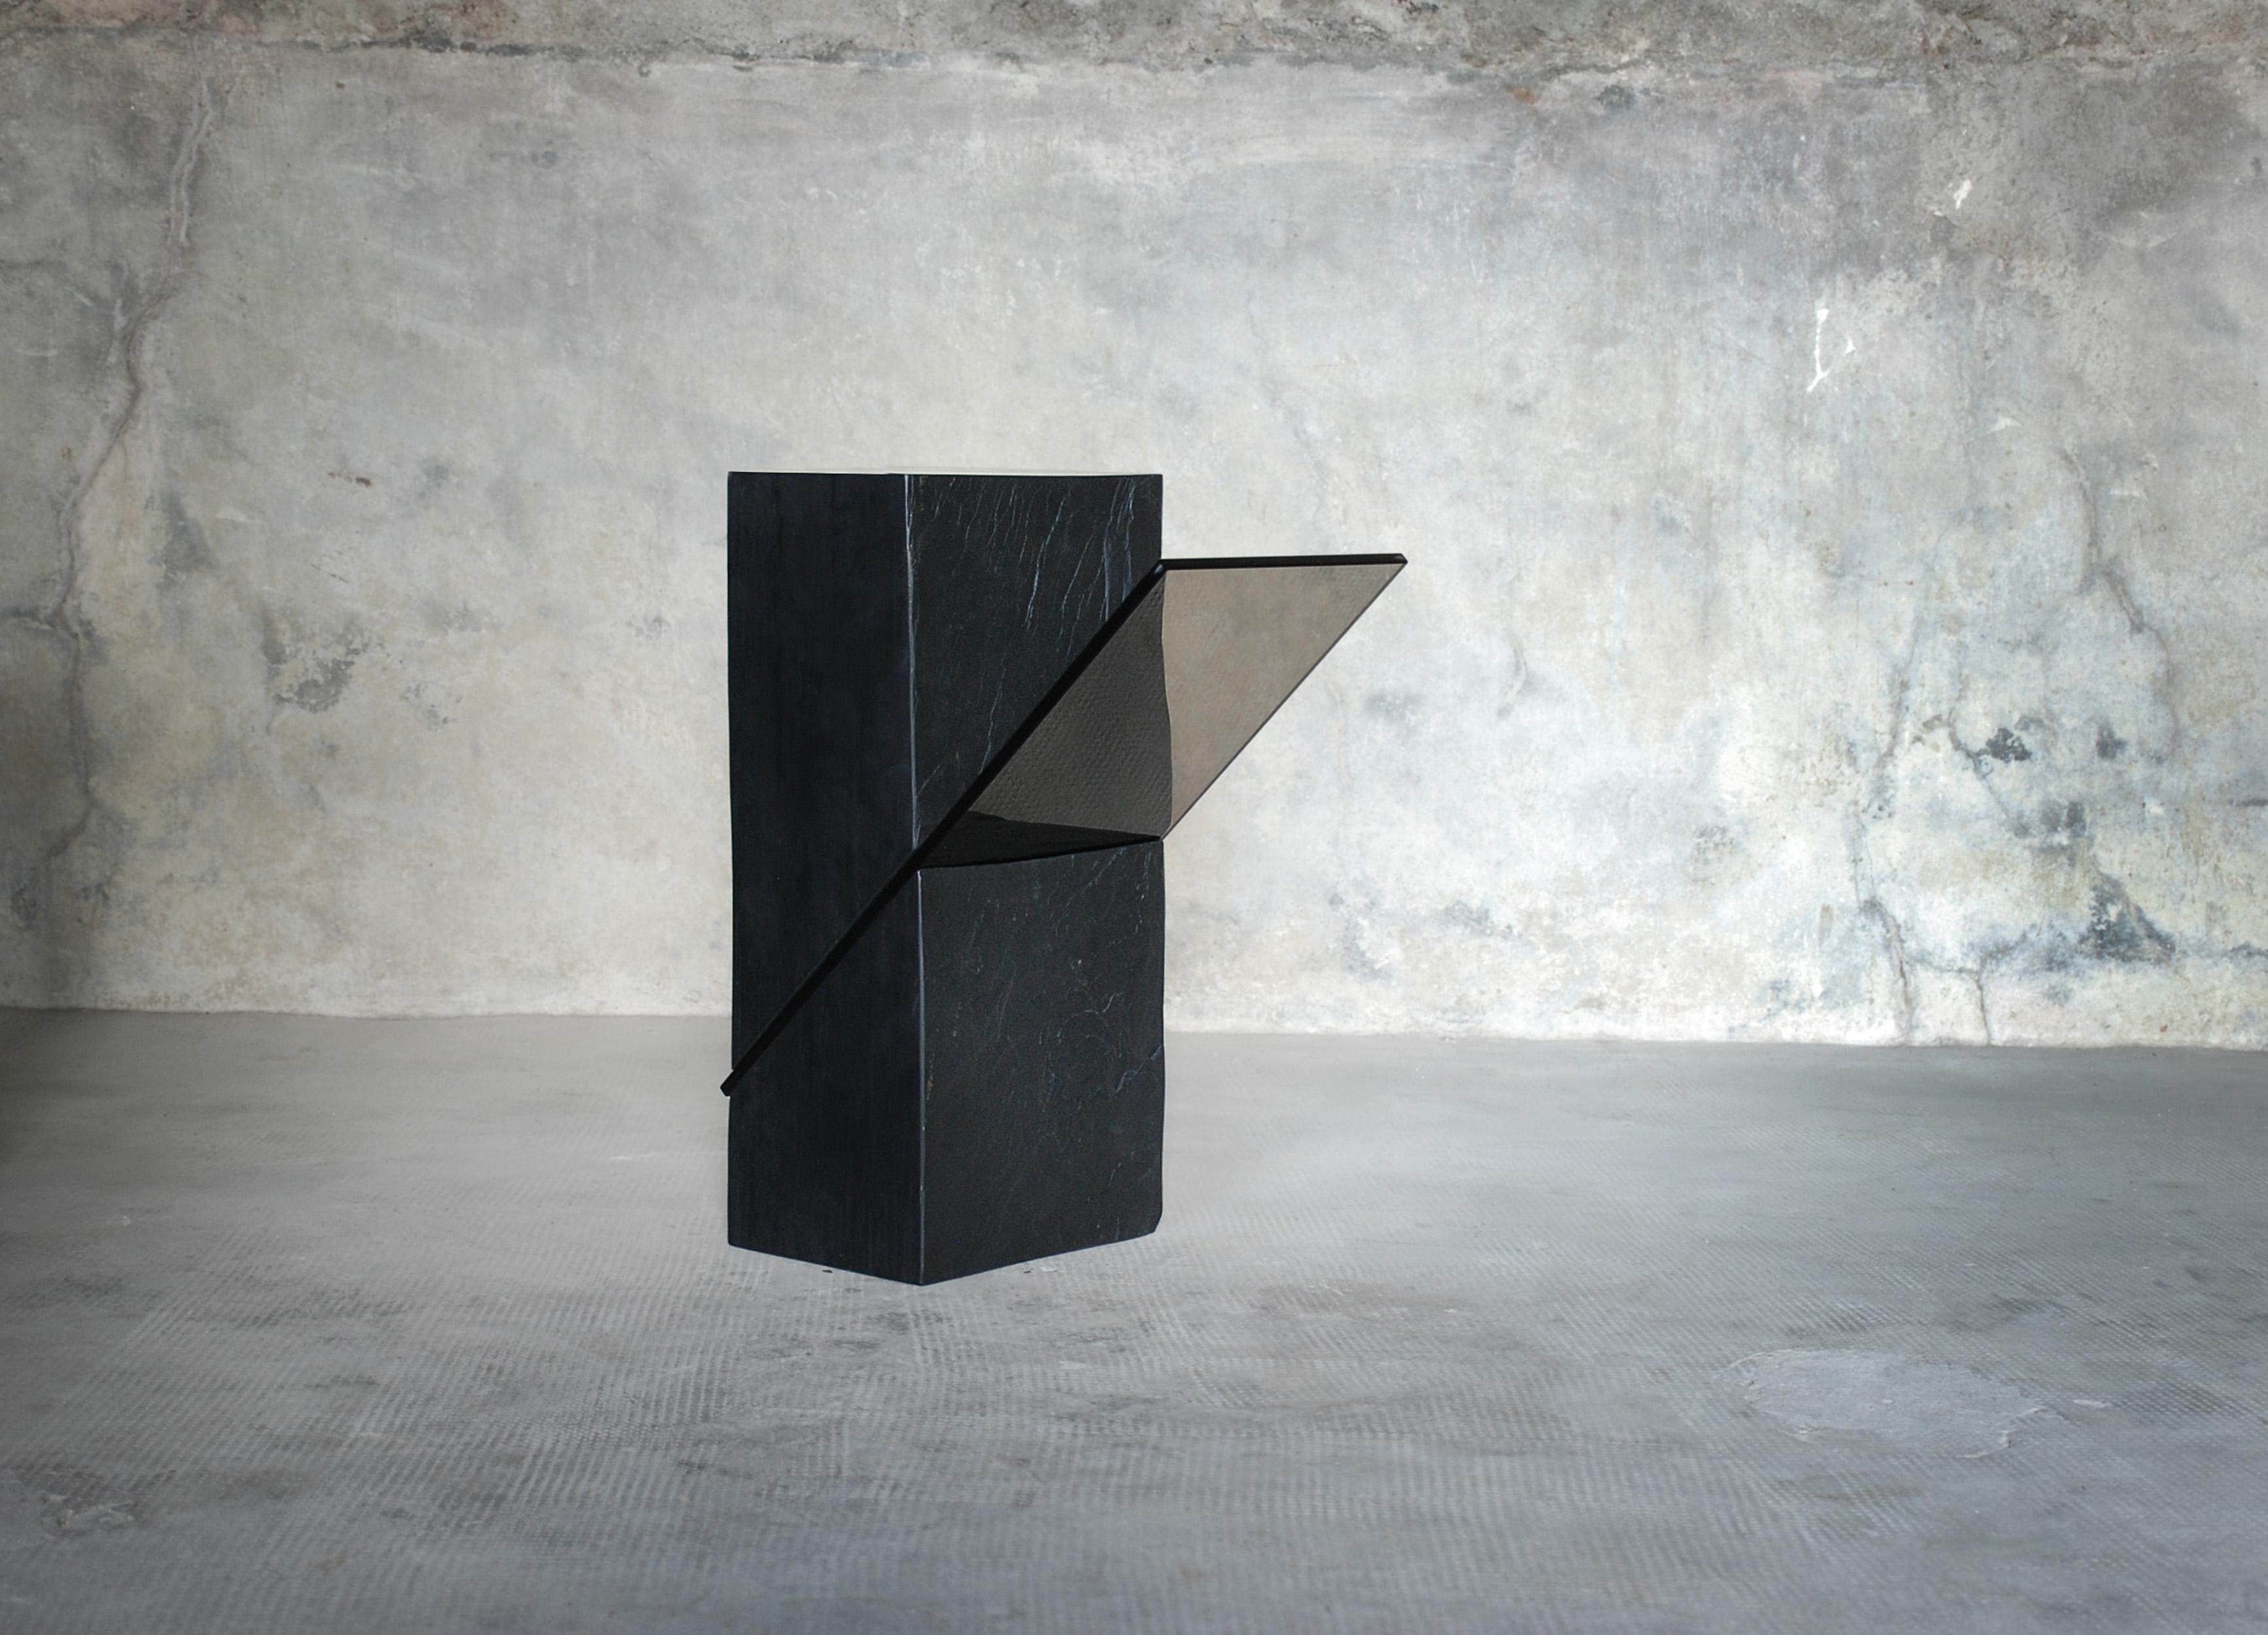 Black Slate Guéridon, Averti, Frederic Saulou
Materials: Black slate, grey smoked glass.
Dimensions: 50 x 25 x 18 cm.

Edition of eight.
Signed and numbered.

